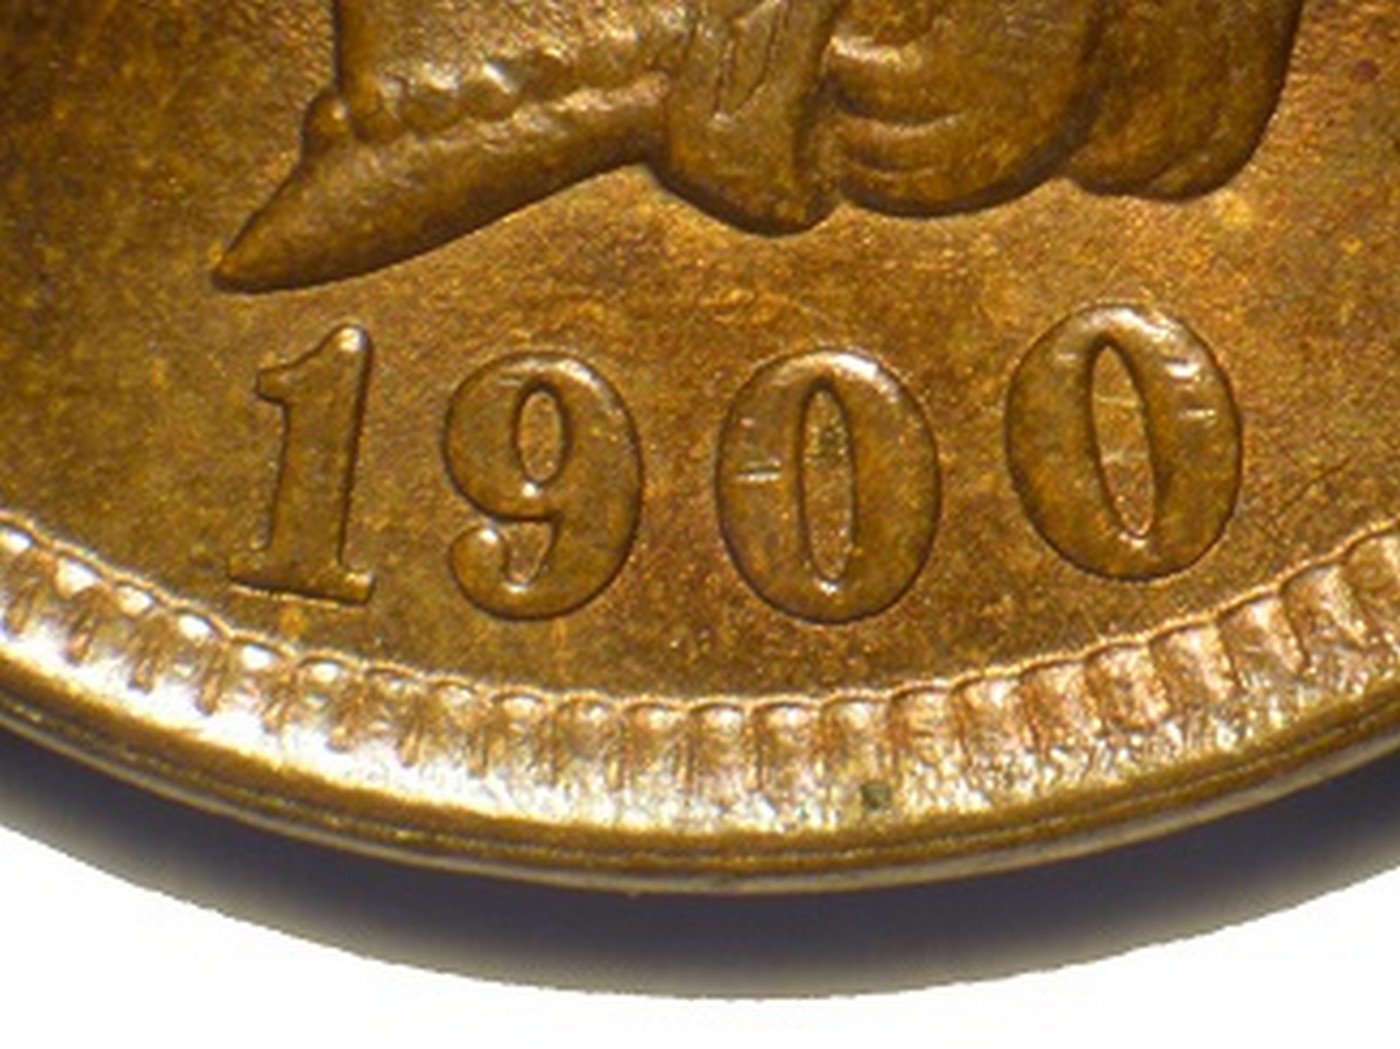 1900 RPD-027 - Indian Head Cent - Photo by David Poliquin